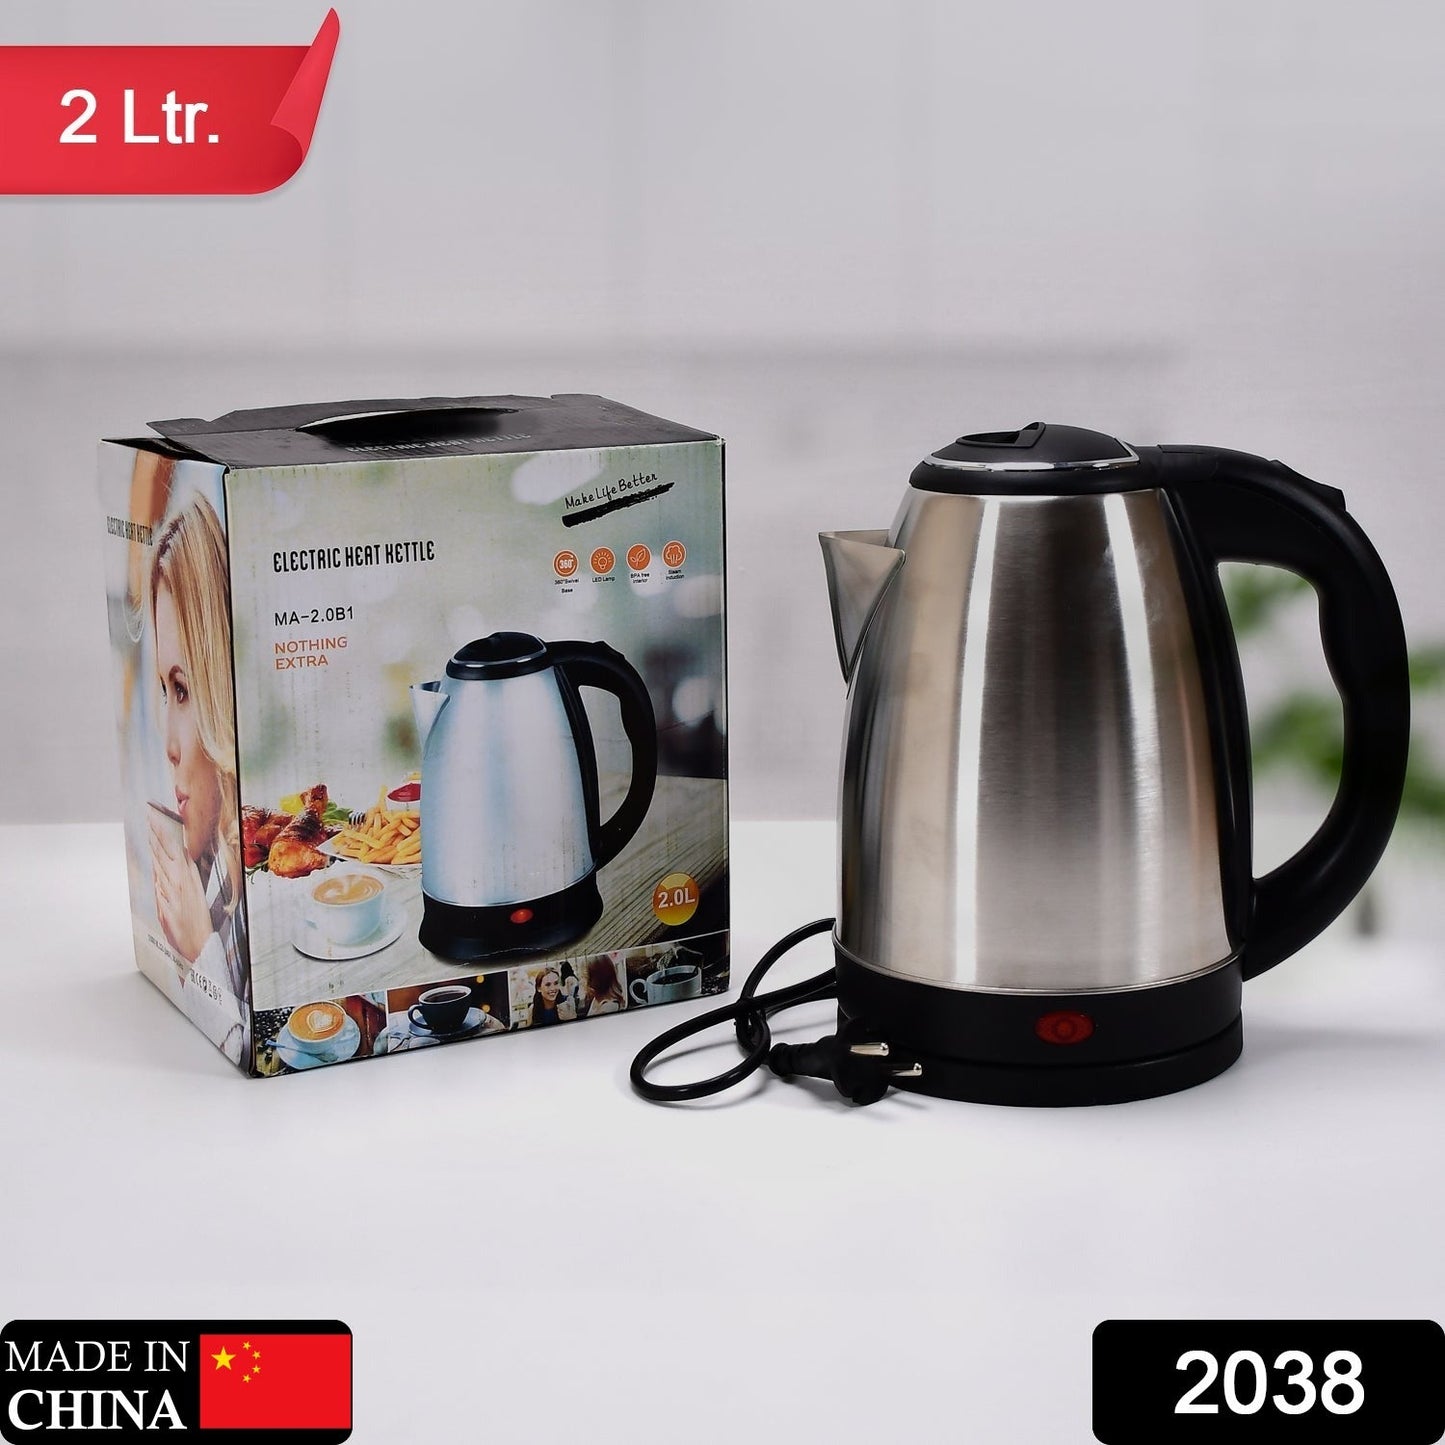 2038 Electric Kettle | Super fast Boiling | 2Litres | Water Tea Coffee Instant Noodles Soup